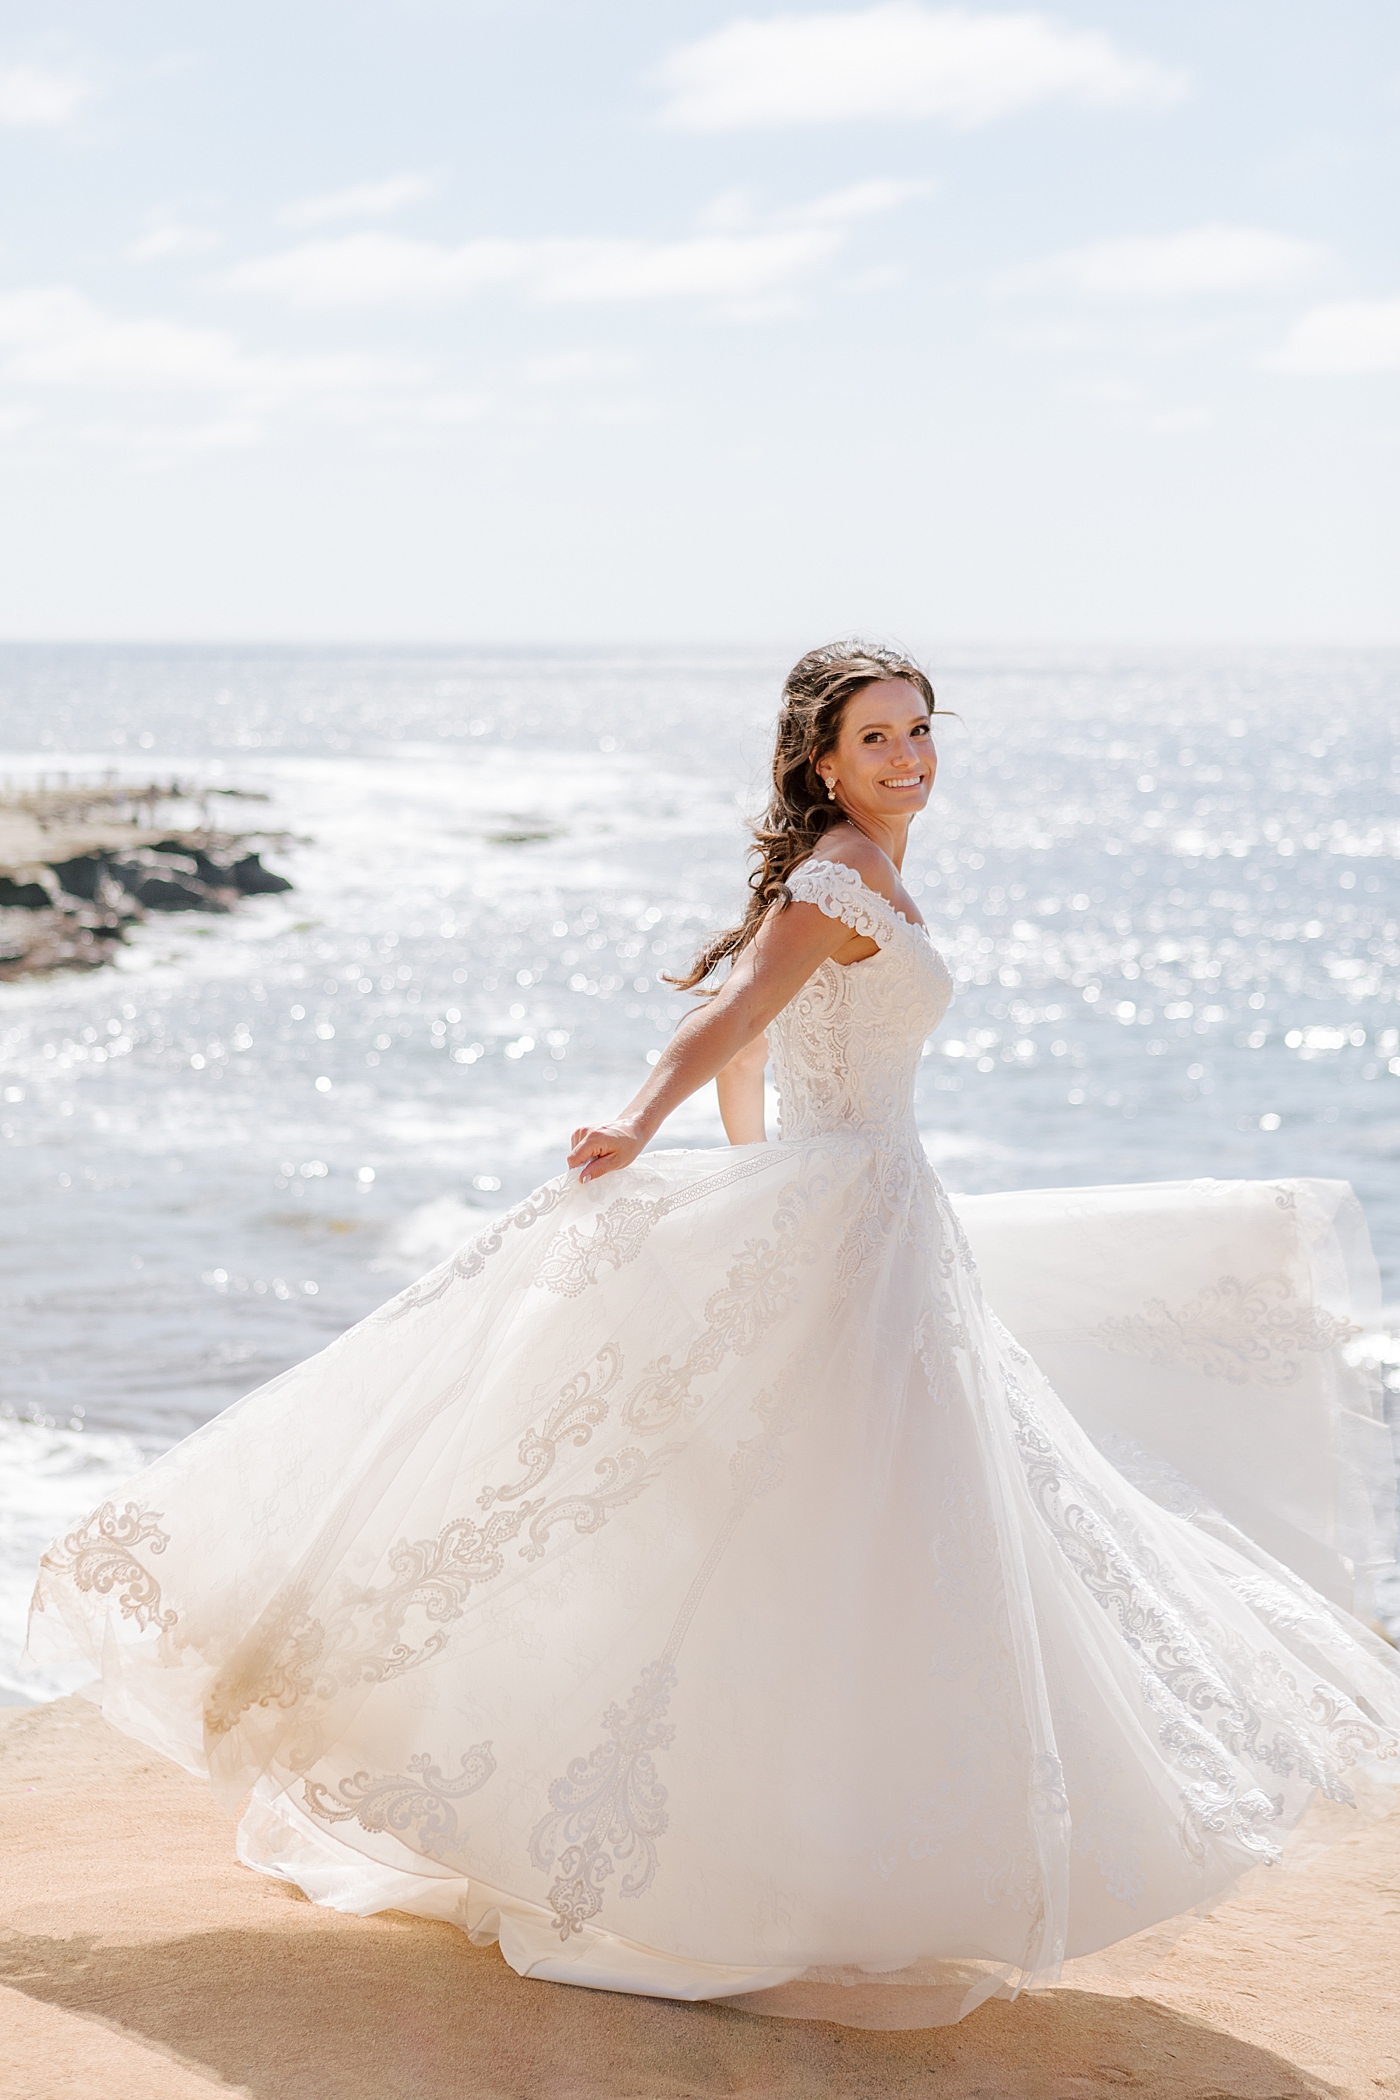 Bright photo of a bride ocean front looking at the camera while spinning in her dress | Image by Hope Helmuth Photography